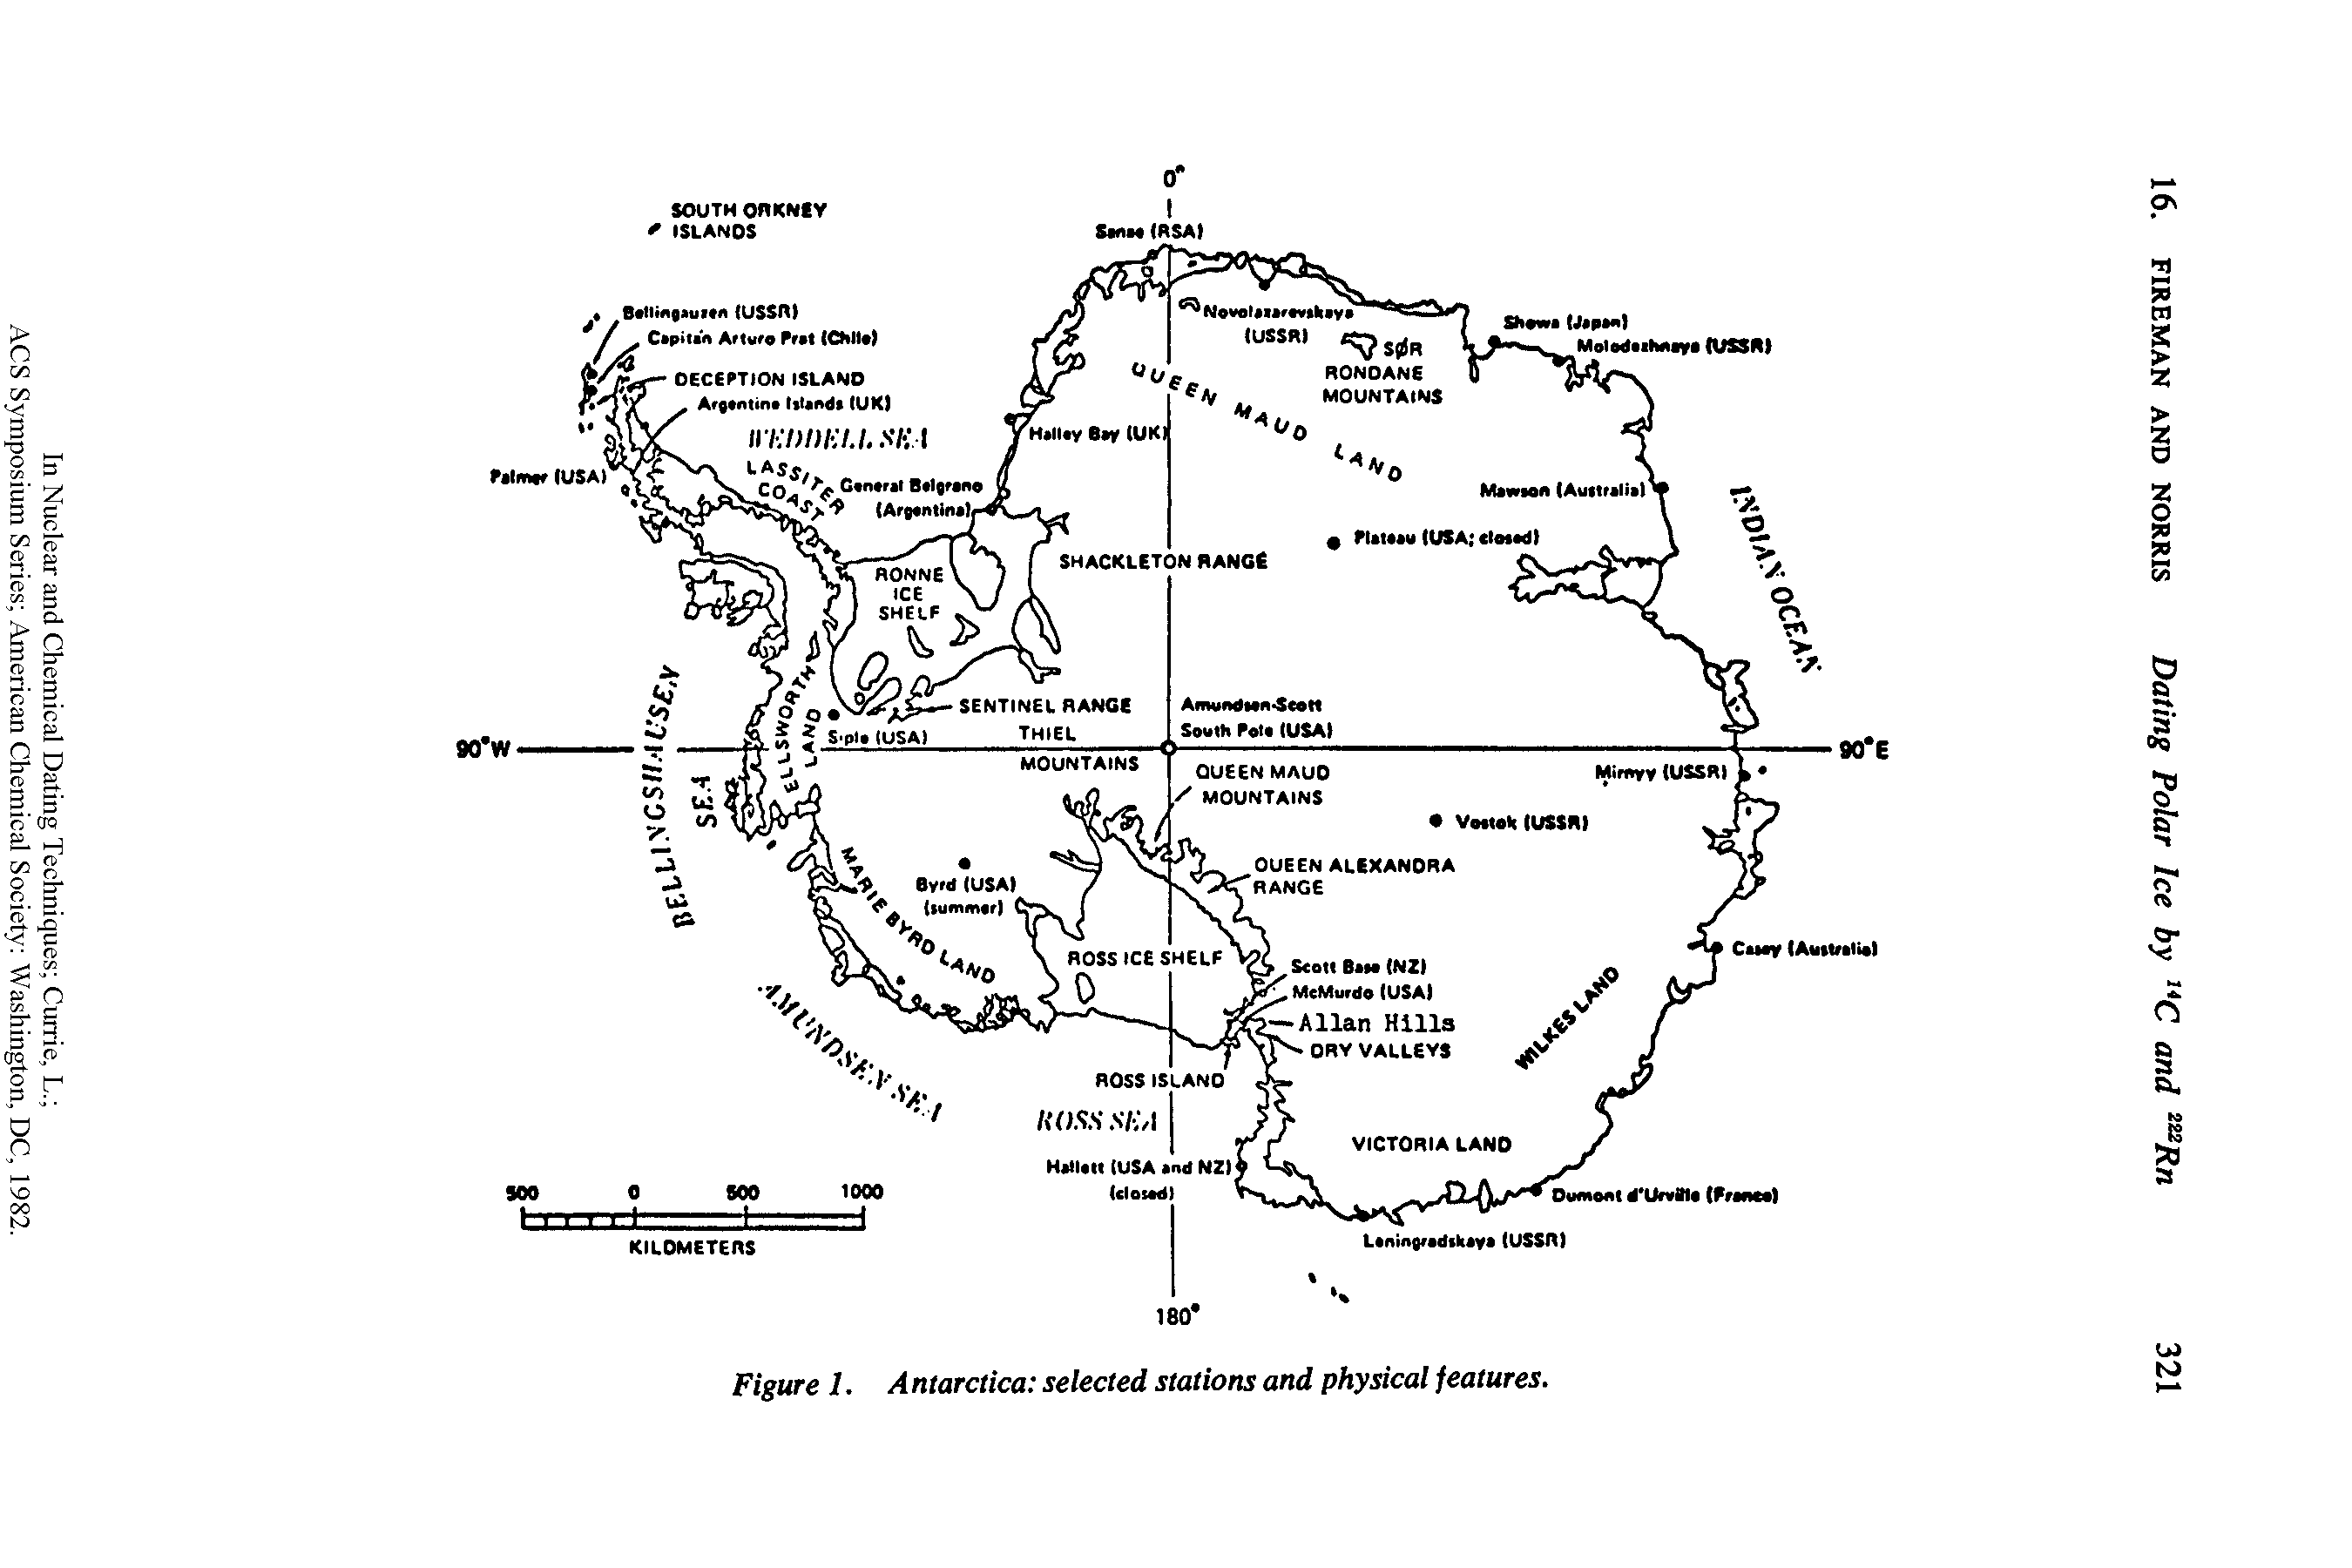 Figure 1. A ntarctica selected stations and physical features.